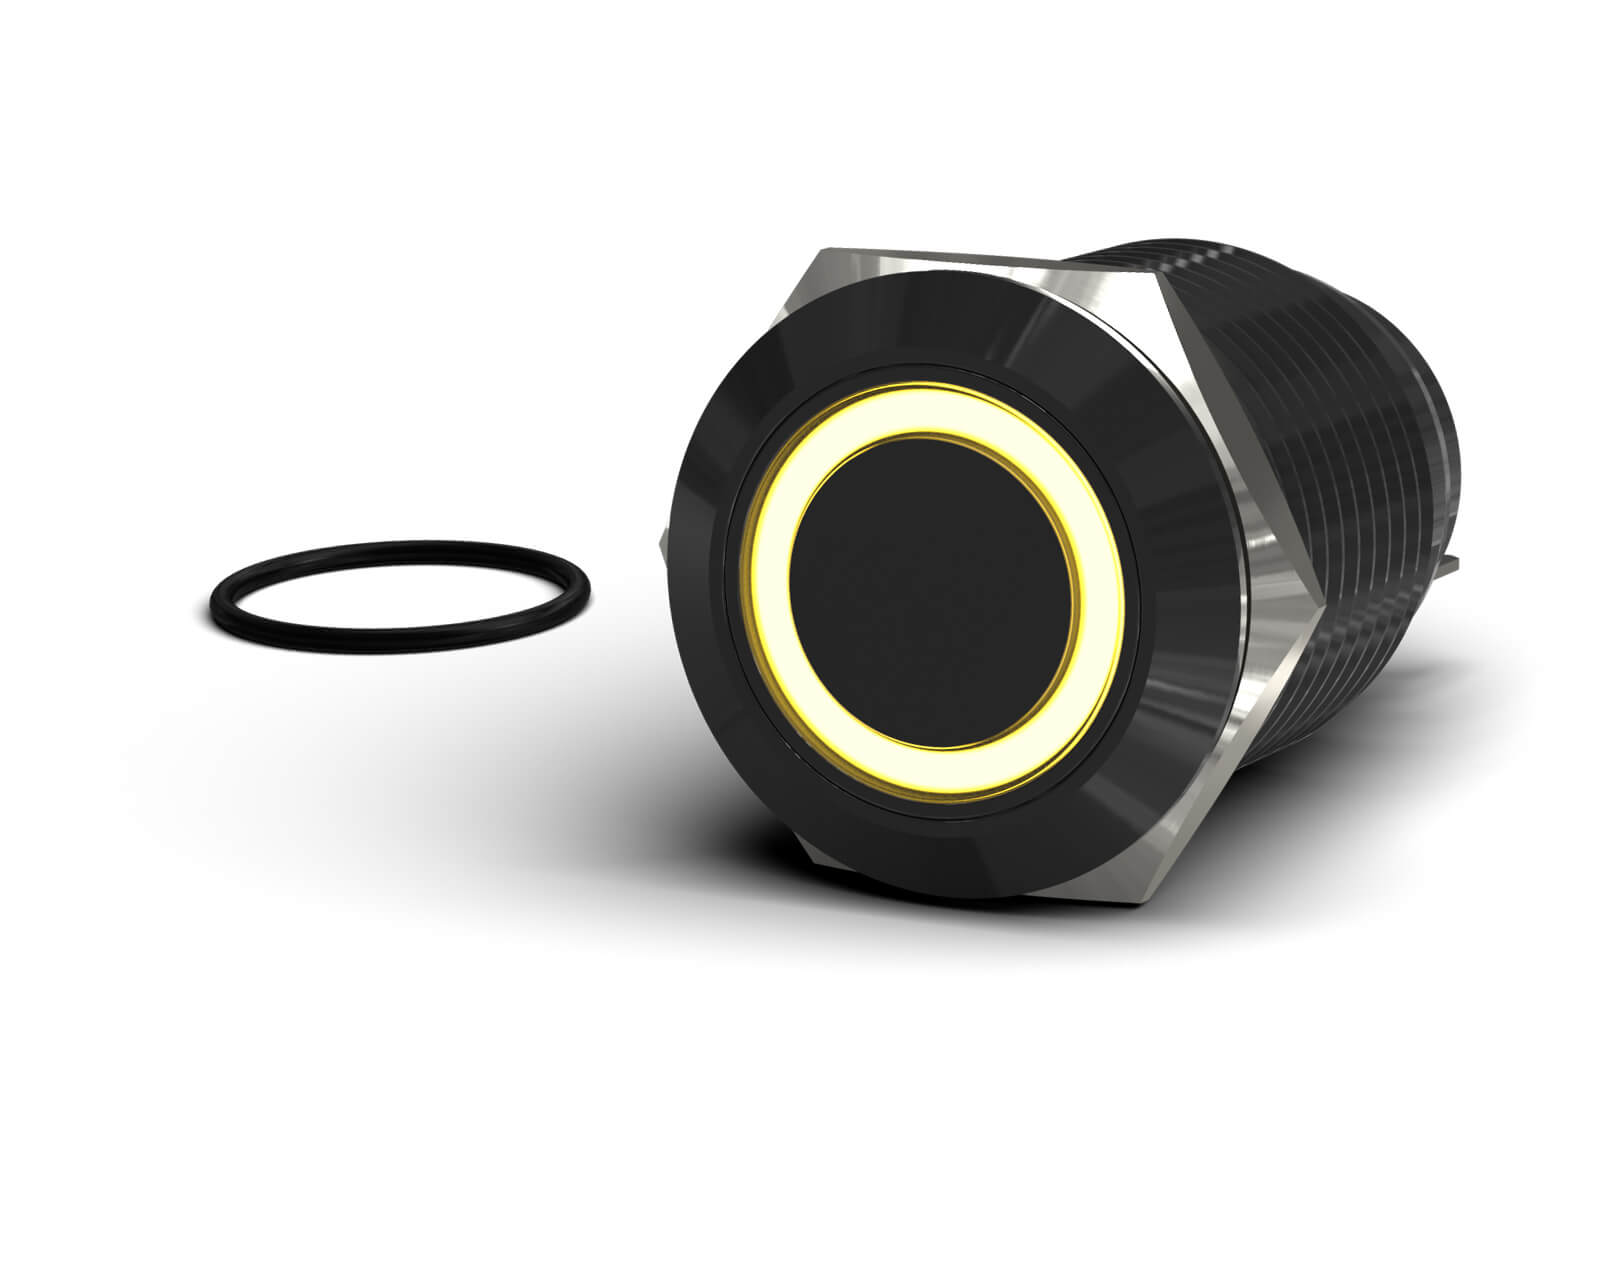 PrimoChill Black Aluminum Latching Vandal Resistant Switch - 22mm - PrimoChill - KEEPING IT COOL Amber LED Ring